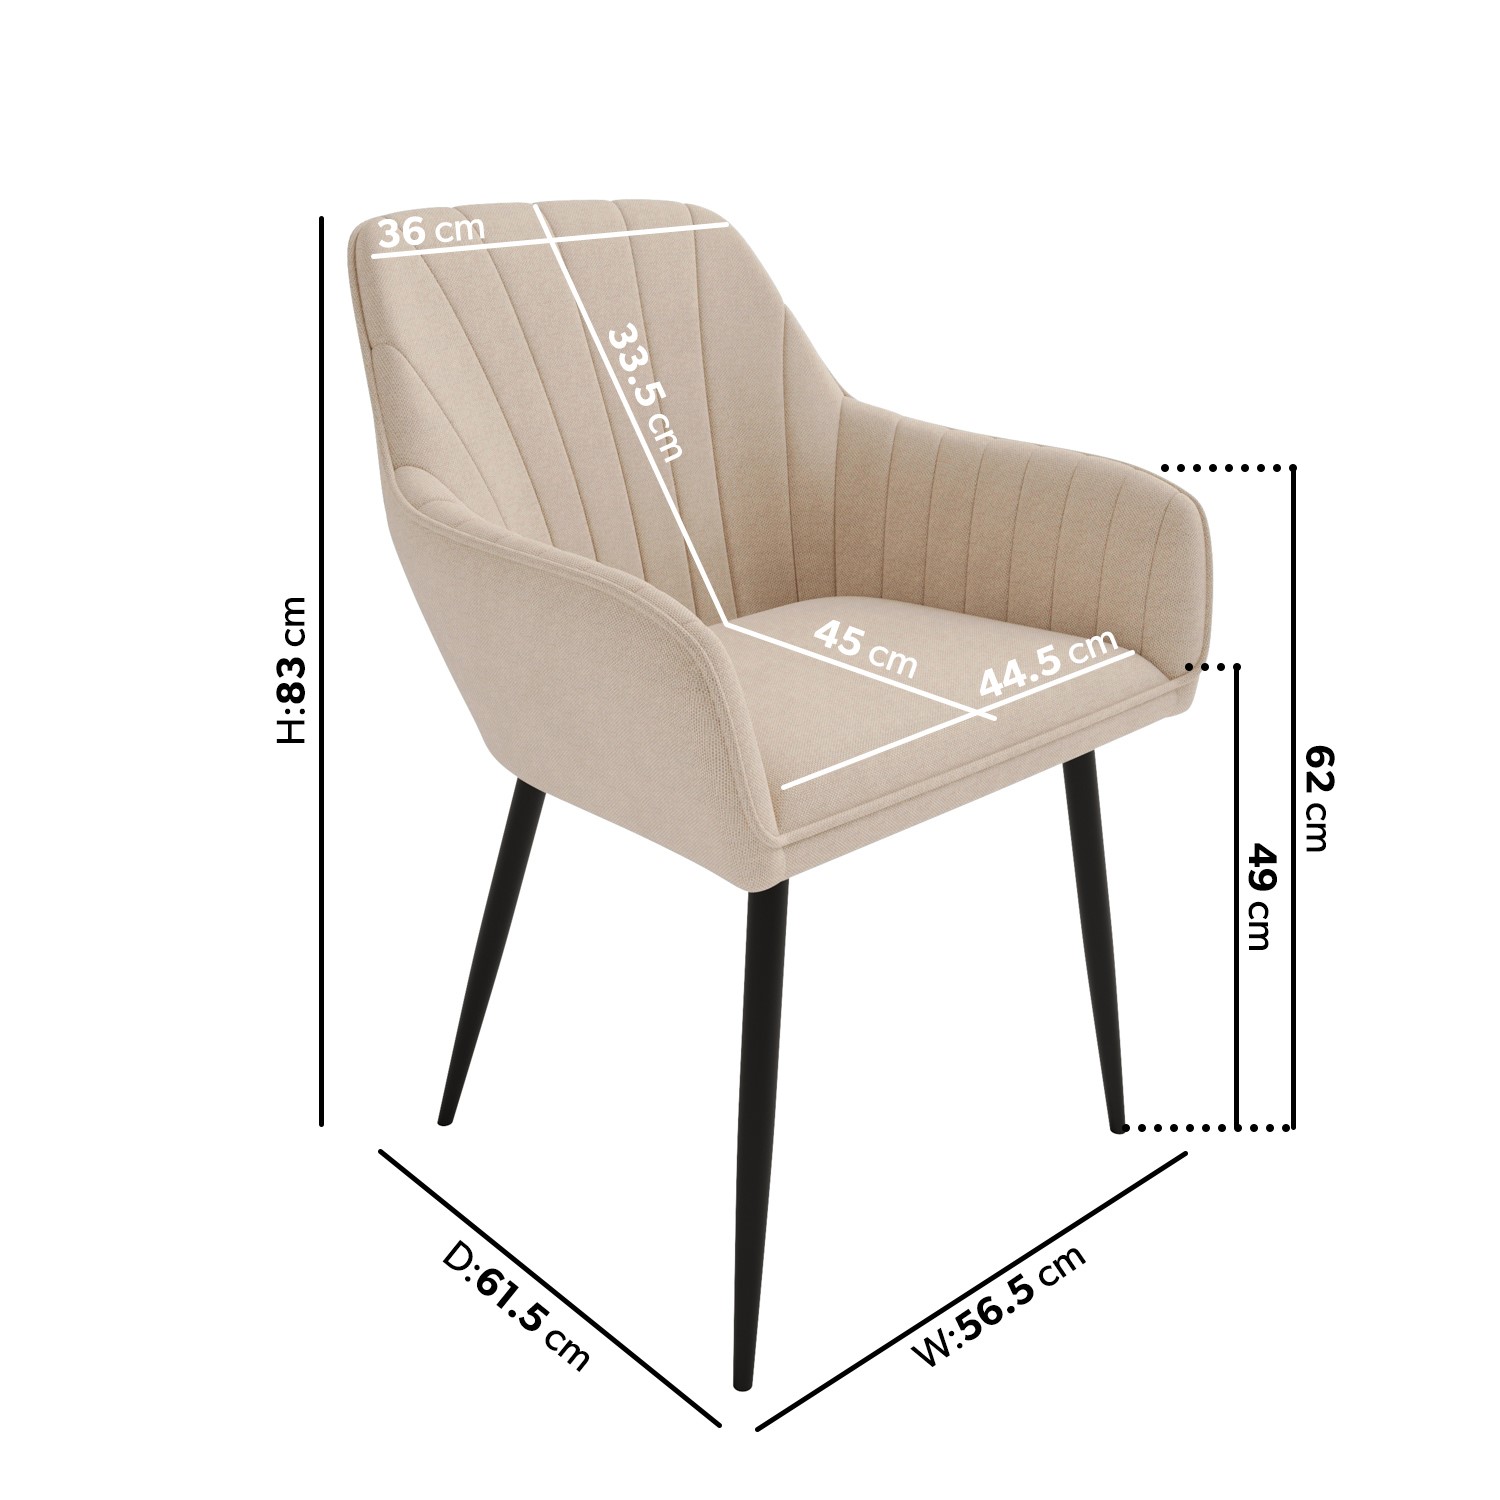 Read more about Set of 2 beige fabric tub dining chairs logan